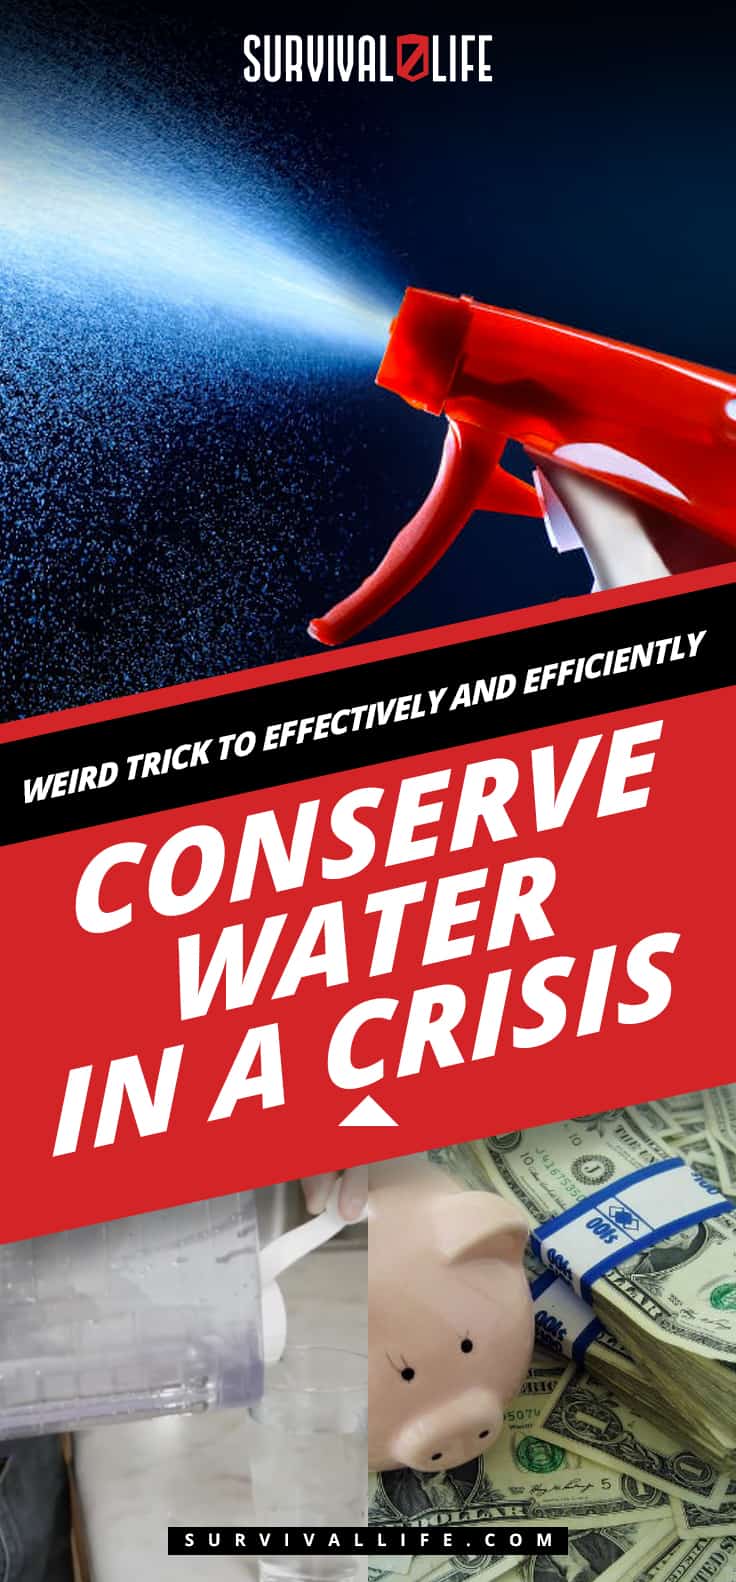 Weird Trick To Effectively And Efficiently Conserve Water In A Crisis